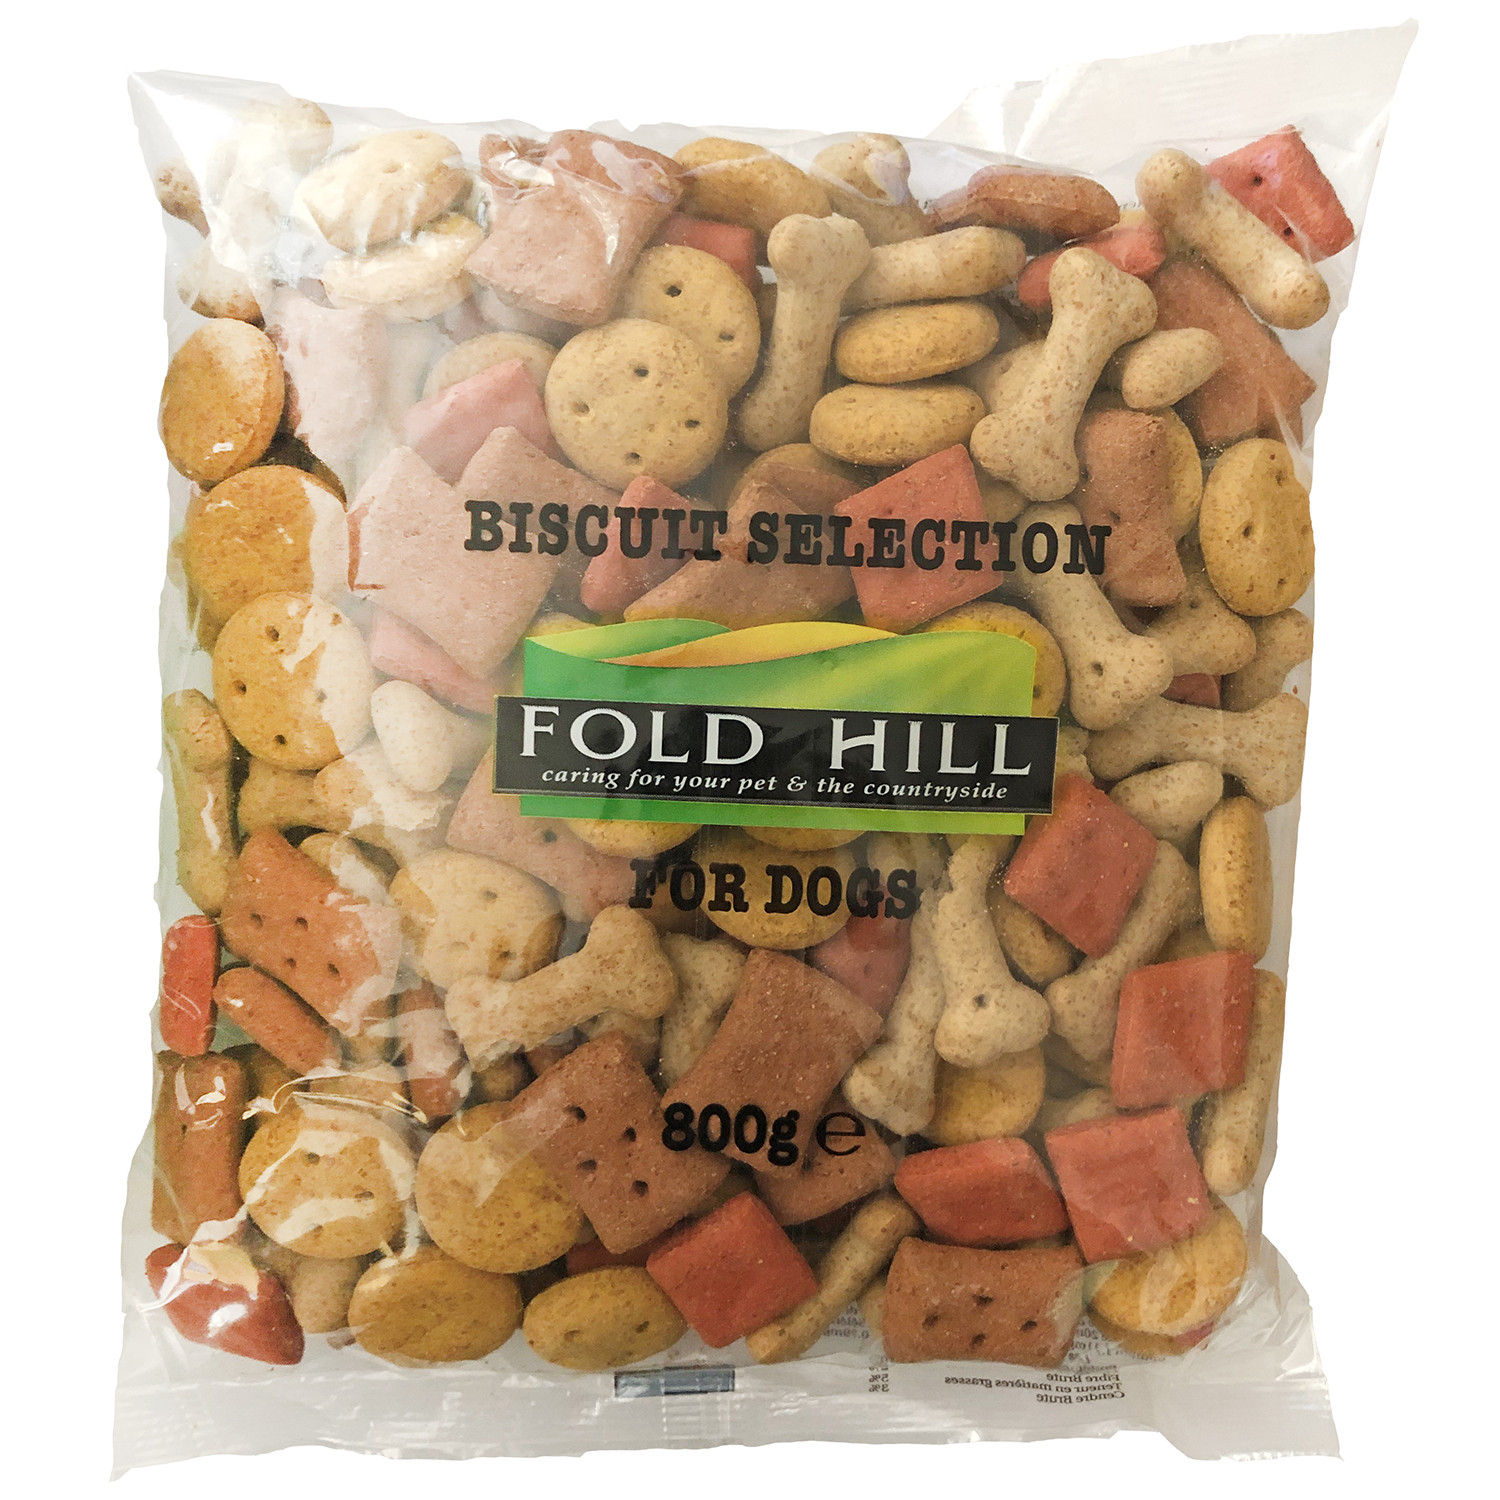 Fold Hill Biscuit Selection Dog Treats 800g Image 1